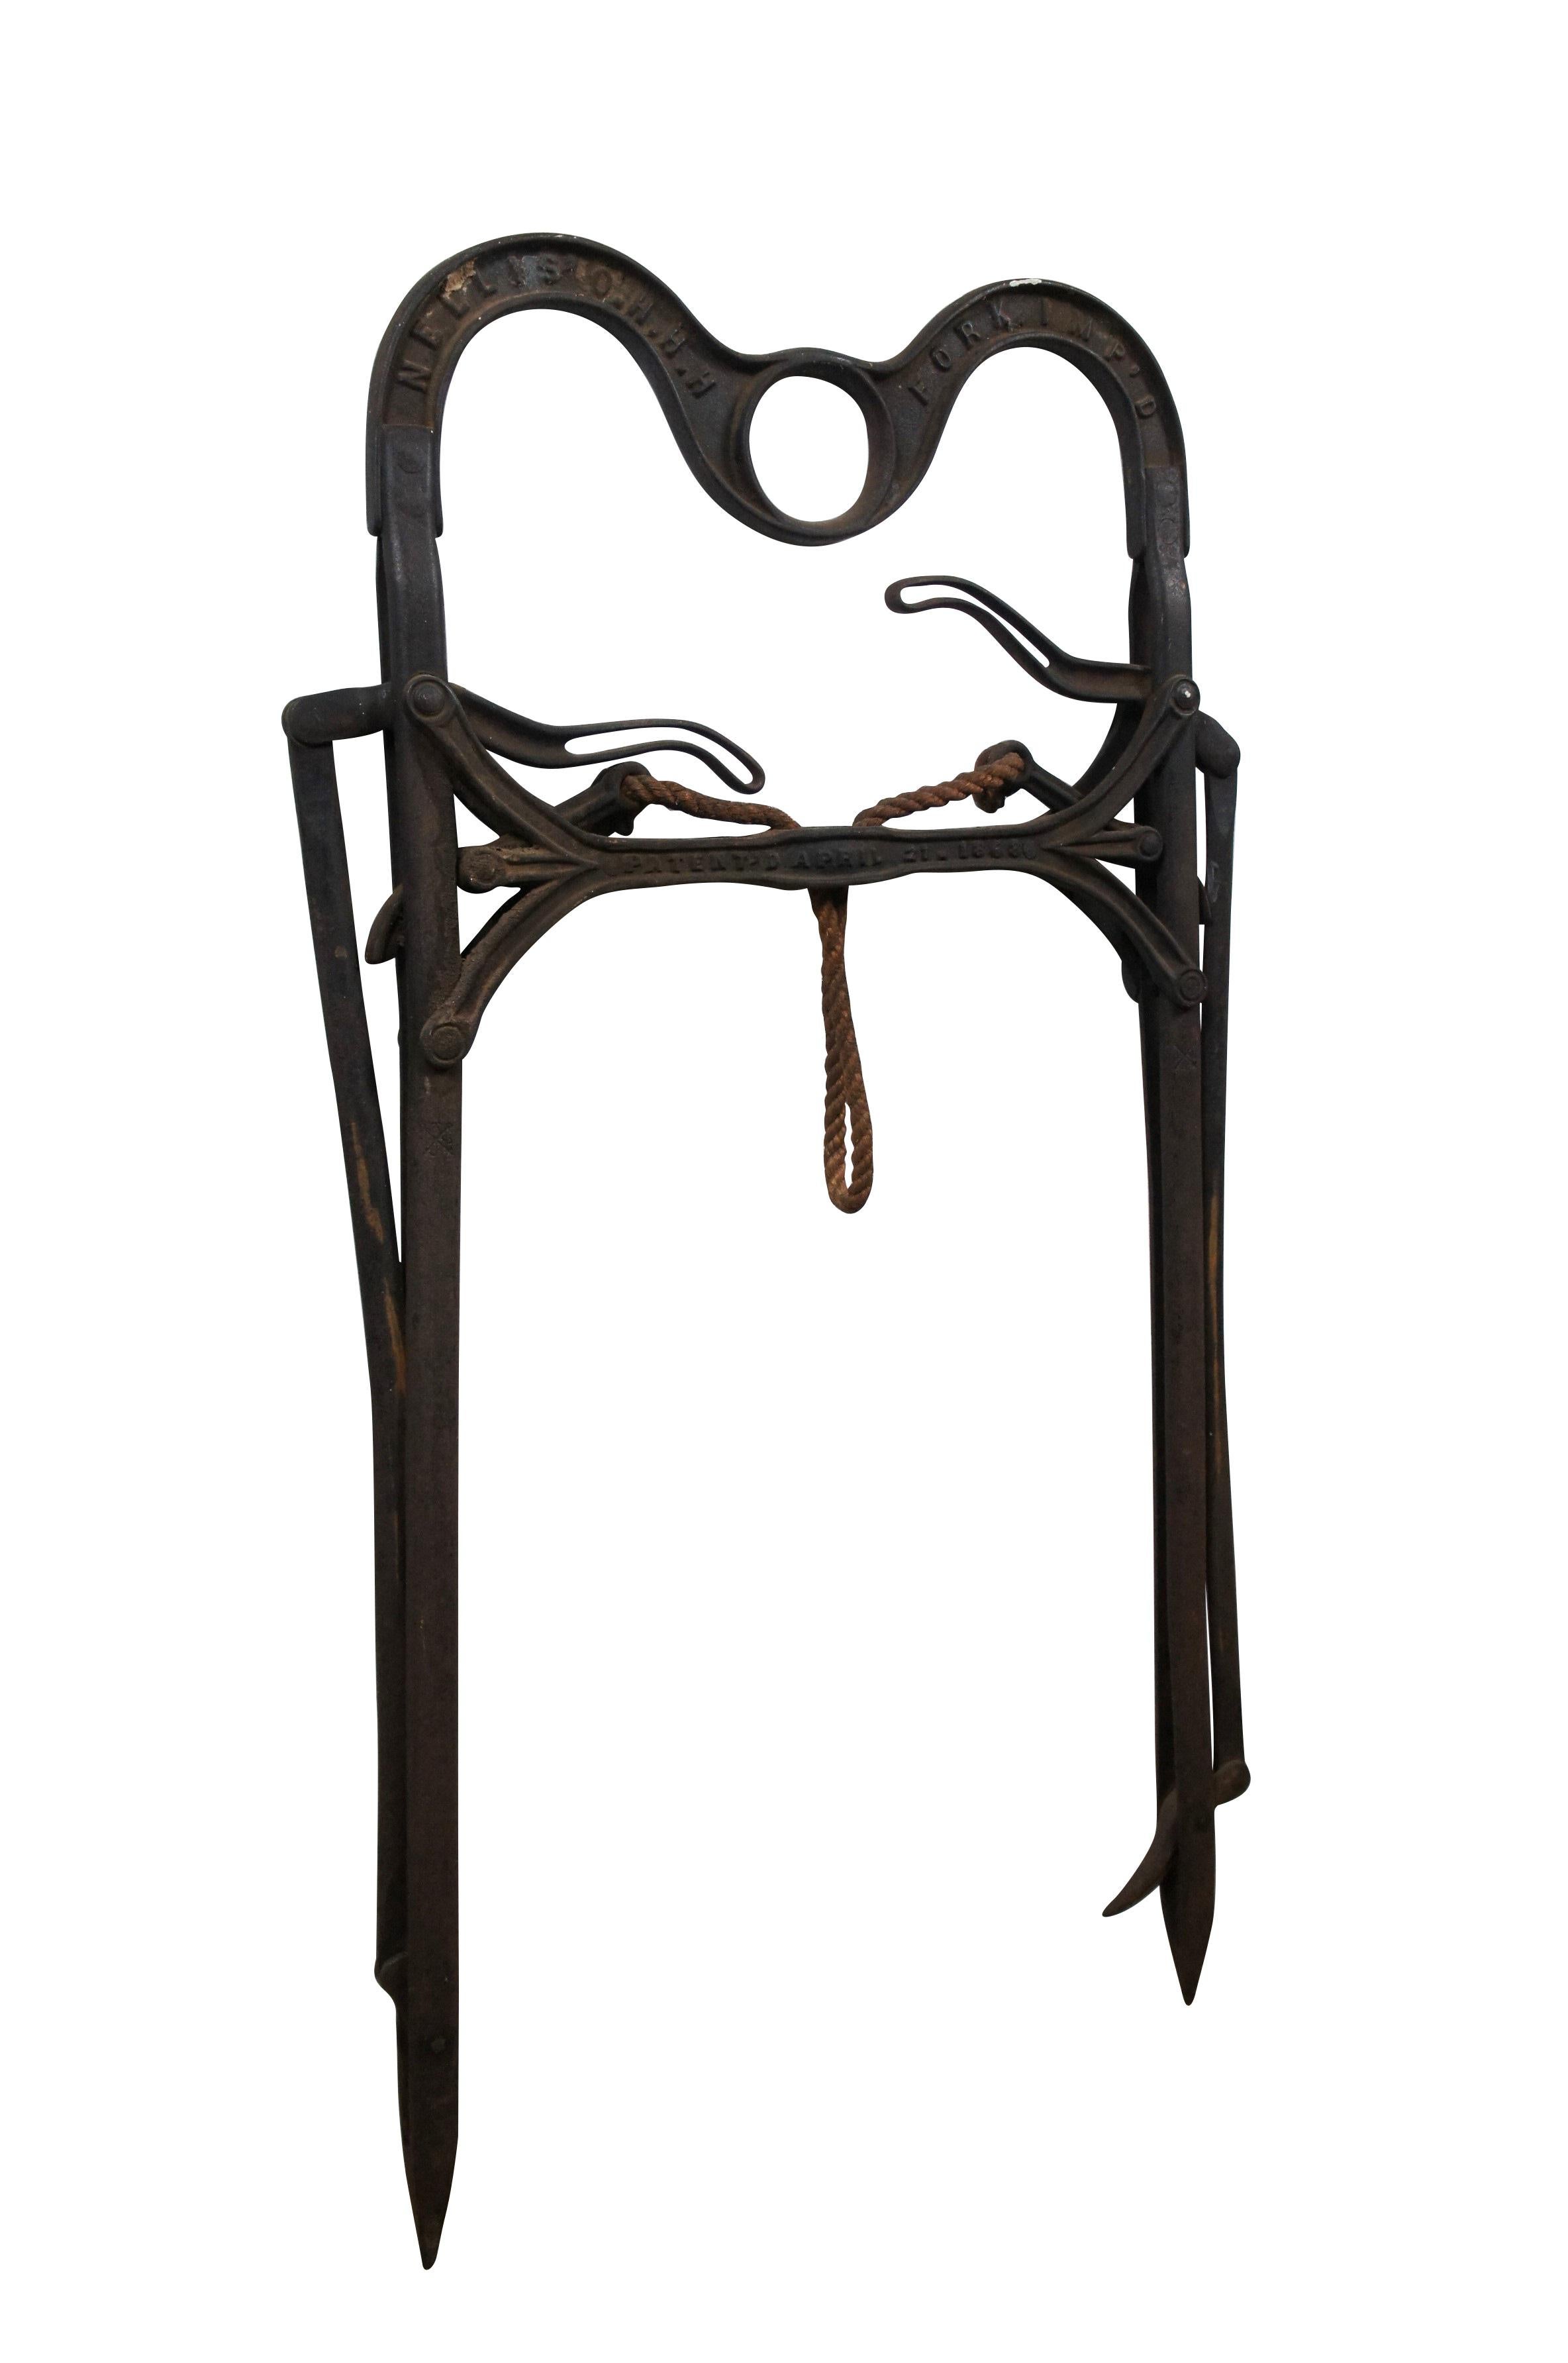 Mid 19th century cast iron hay grapple by A.J. Nellis of Pittsburgh, Pennsylvania, designed to be hung with a pulley /and run along a trolley track to move bales of hay. Marked NELLIS' O.H.H.H. FORK. IMP'D. Patented April 21, 1863.

Dimensions:
21